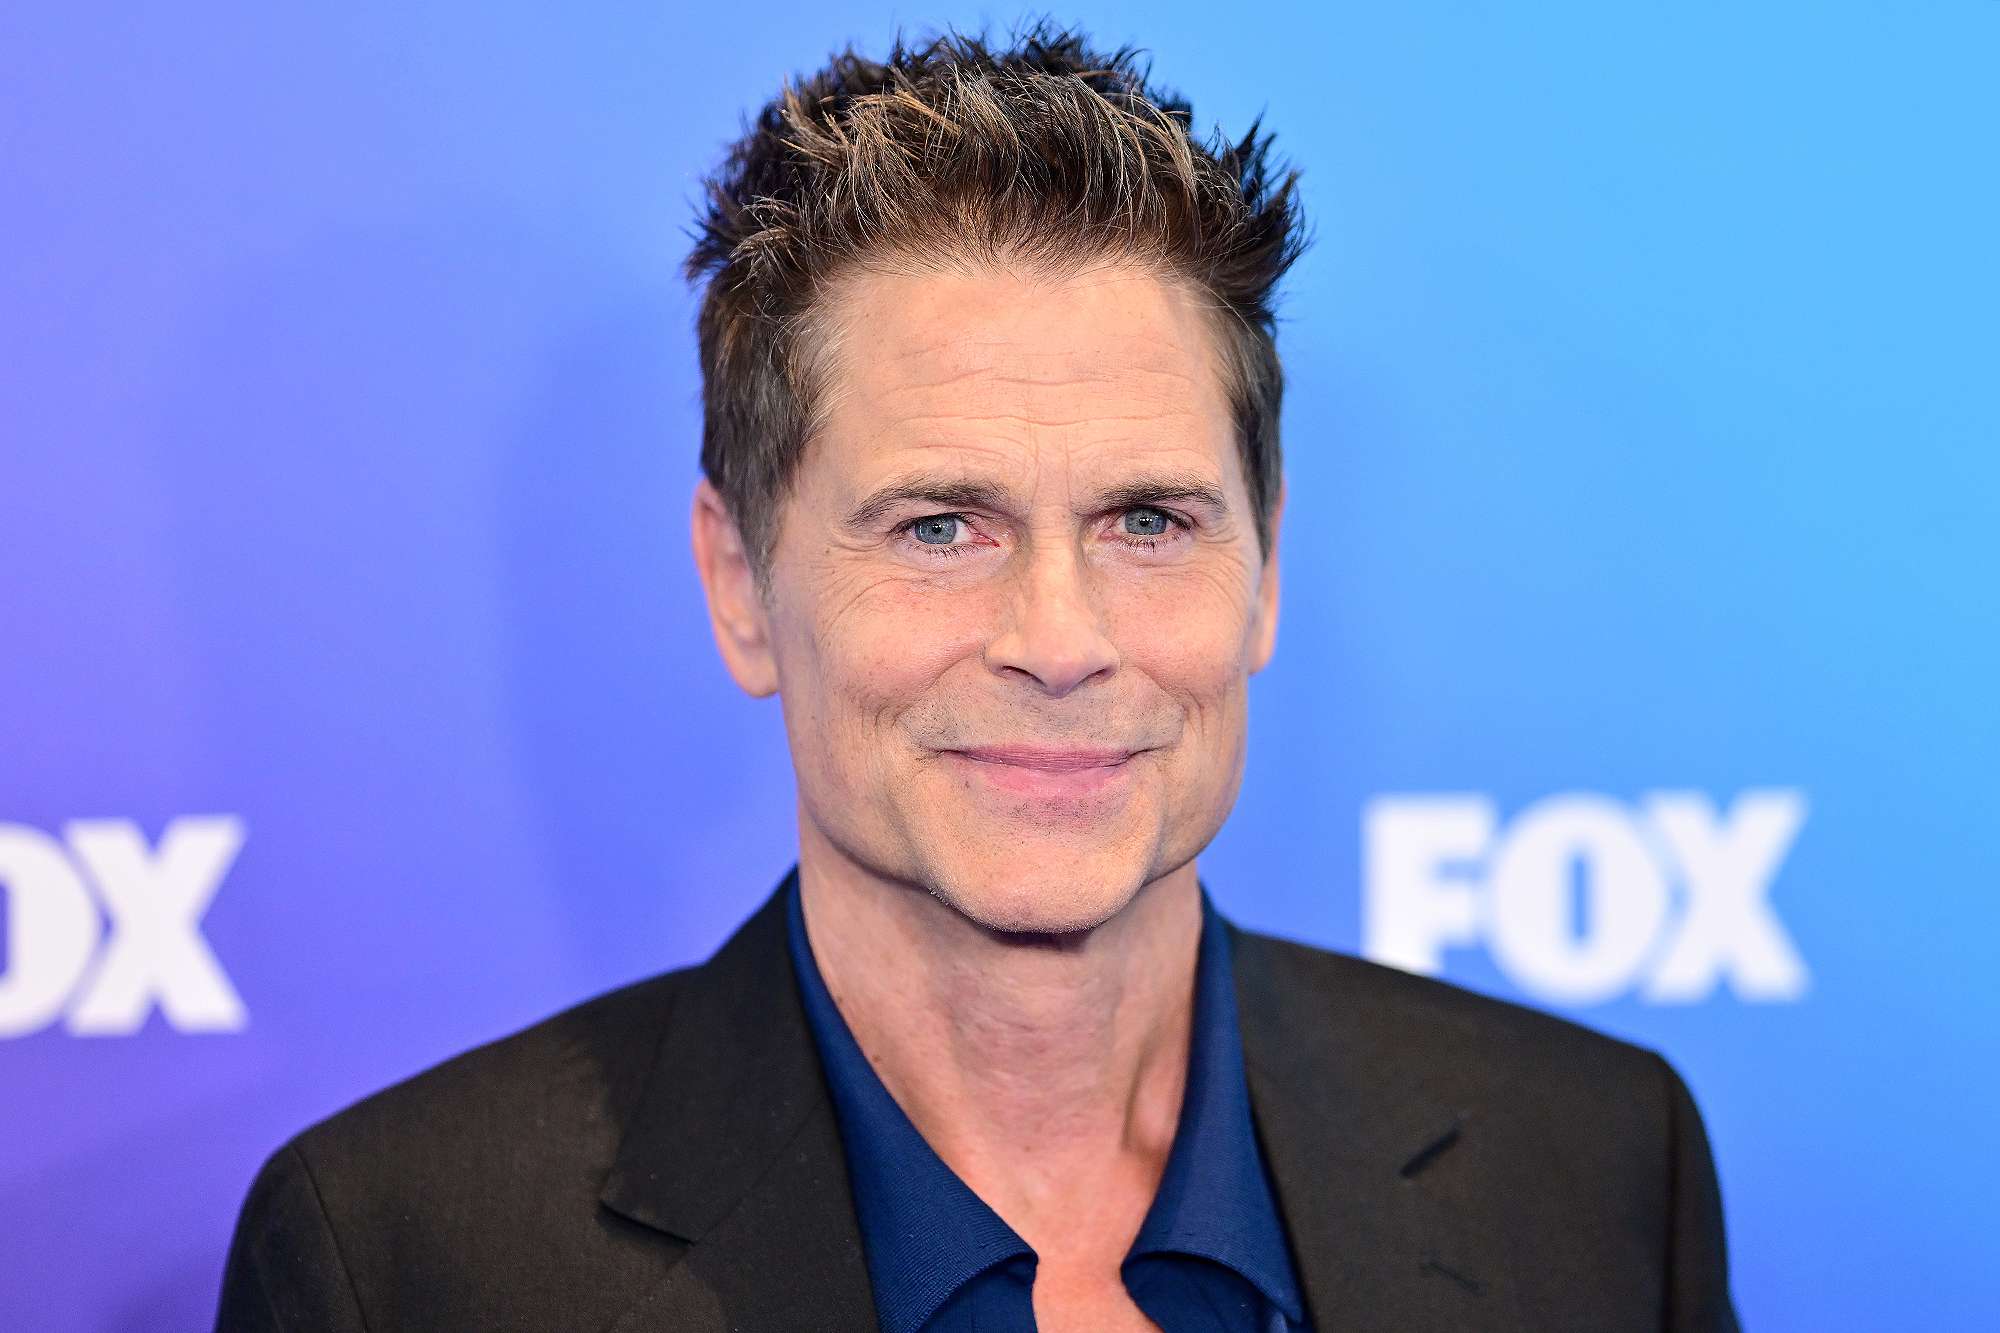 Rob Lowe Checks Out “The Outsiders” Broadway Show 41 Years After the Movie: 'OG Outsider'